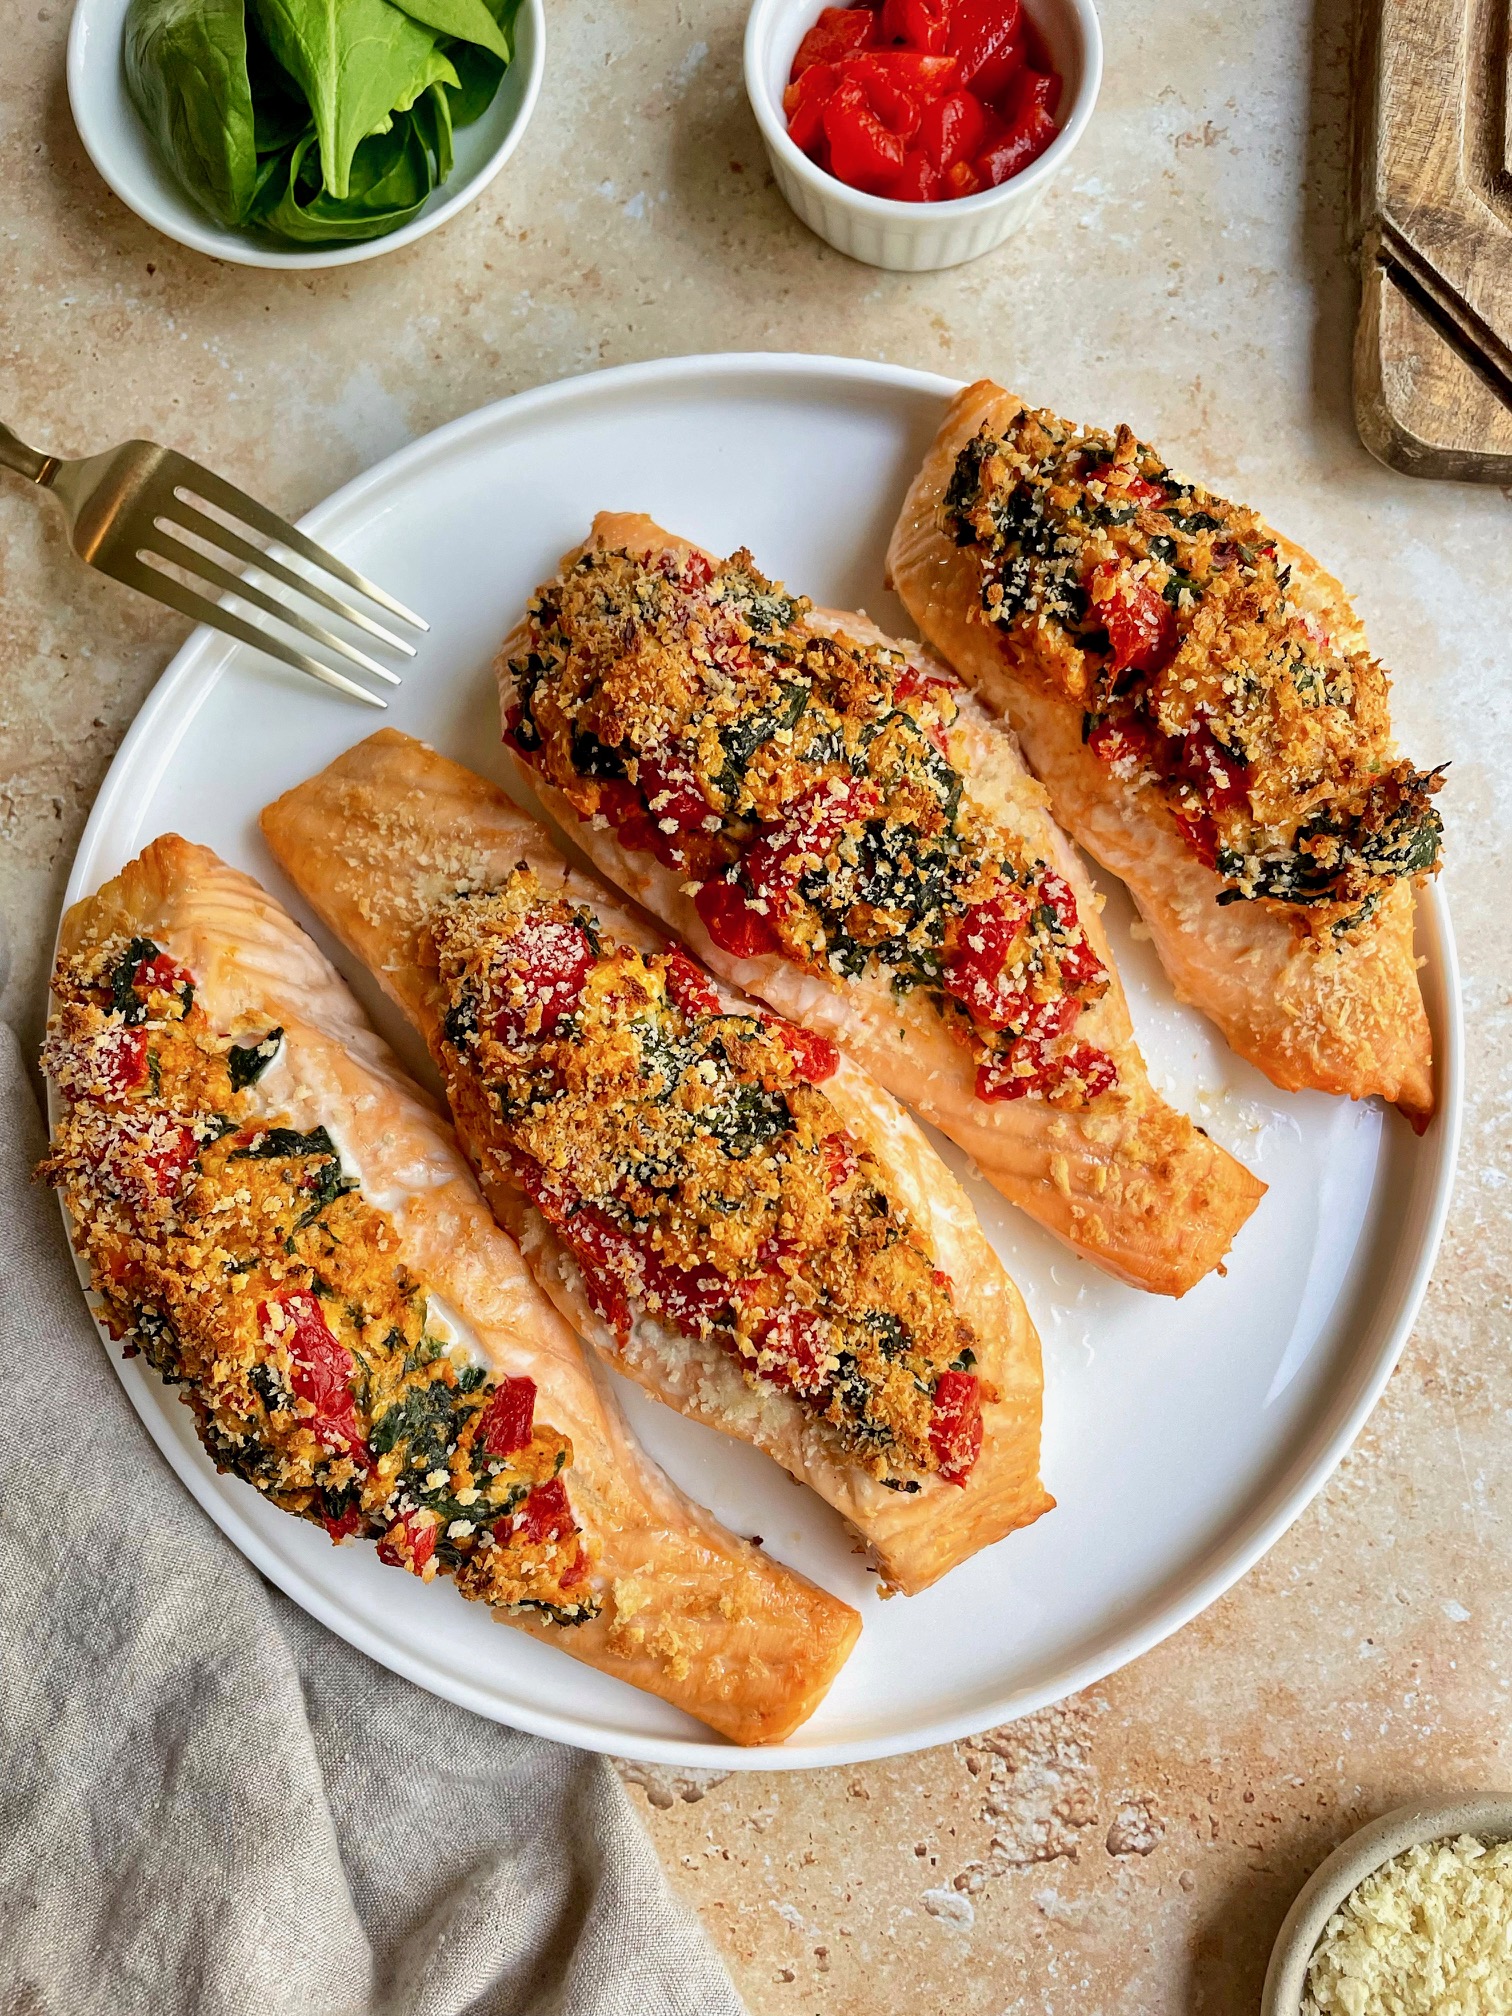 red pepper and spinach stuffed salmon on a plate.